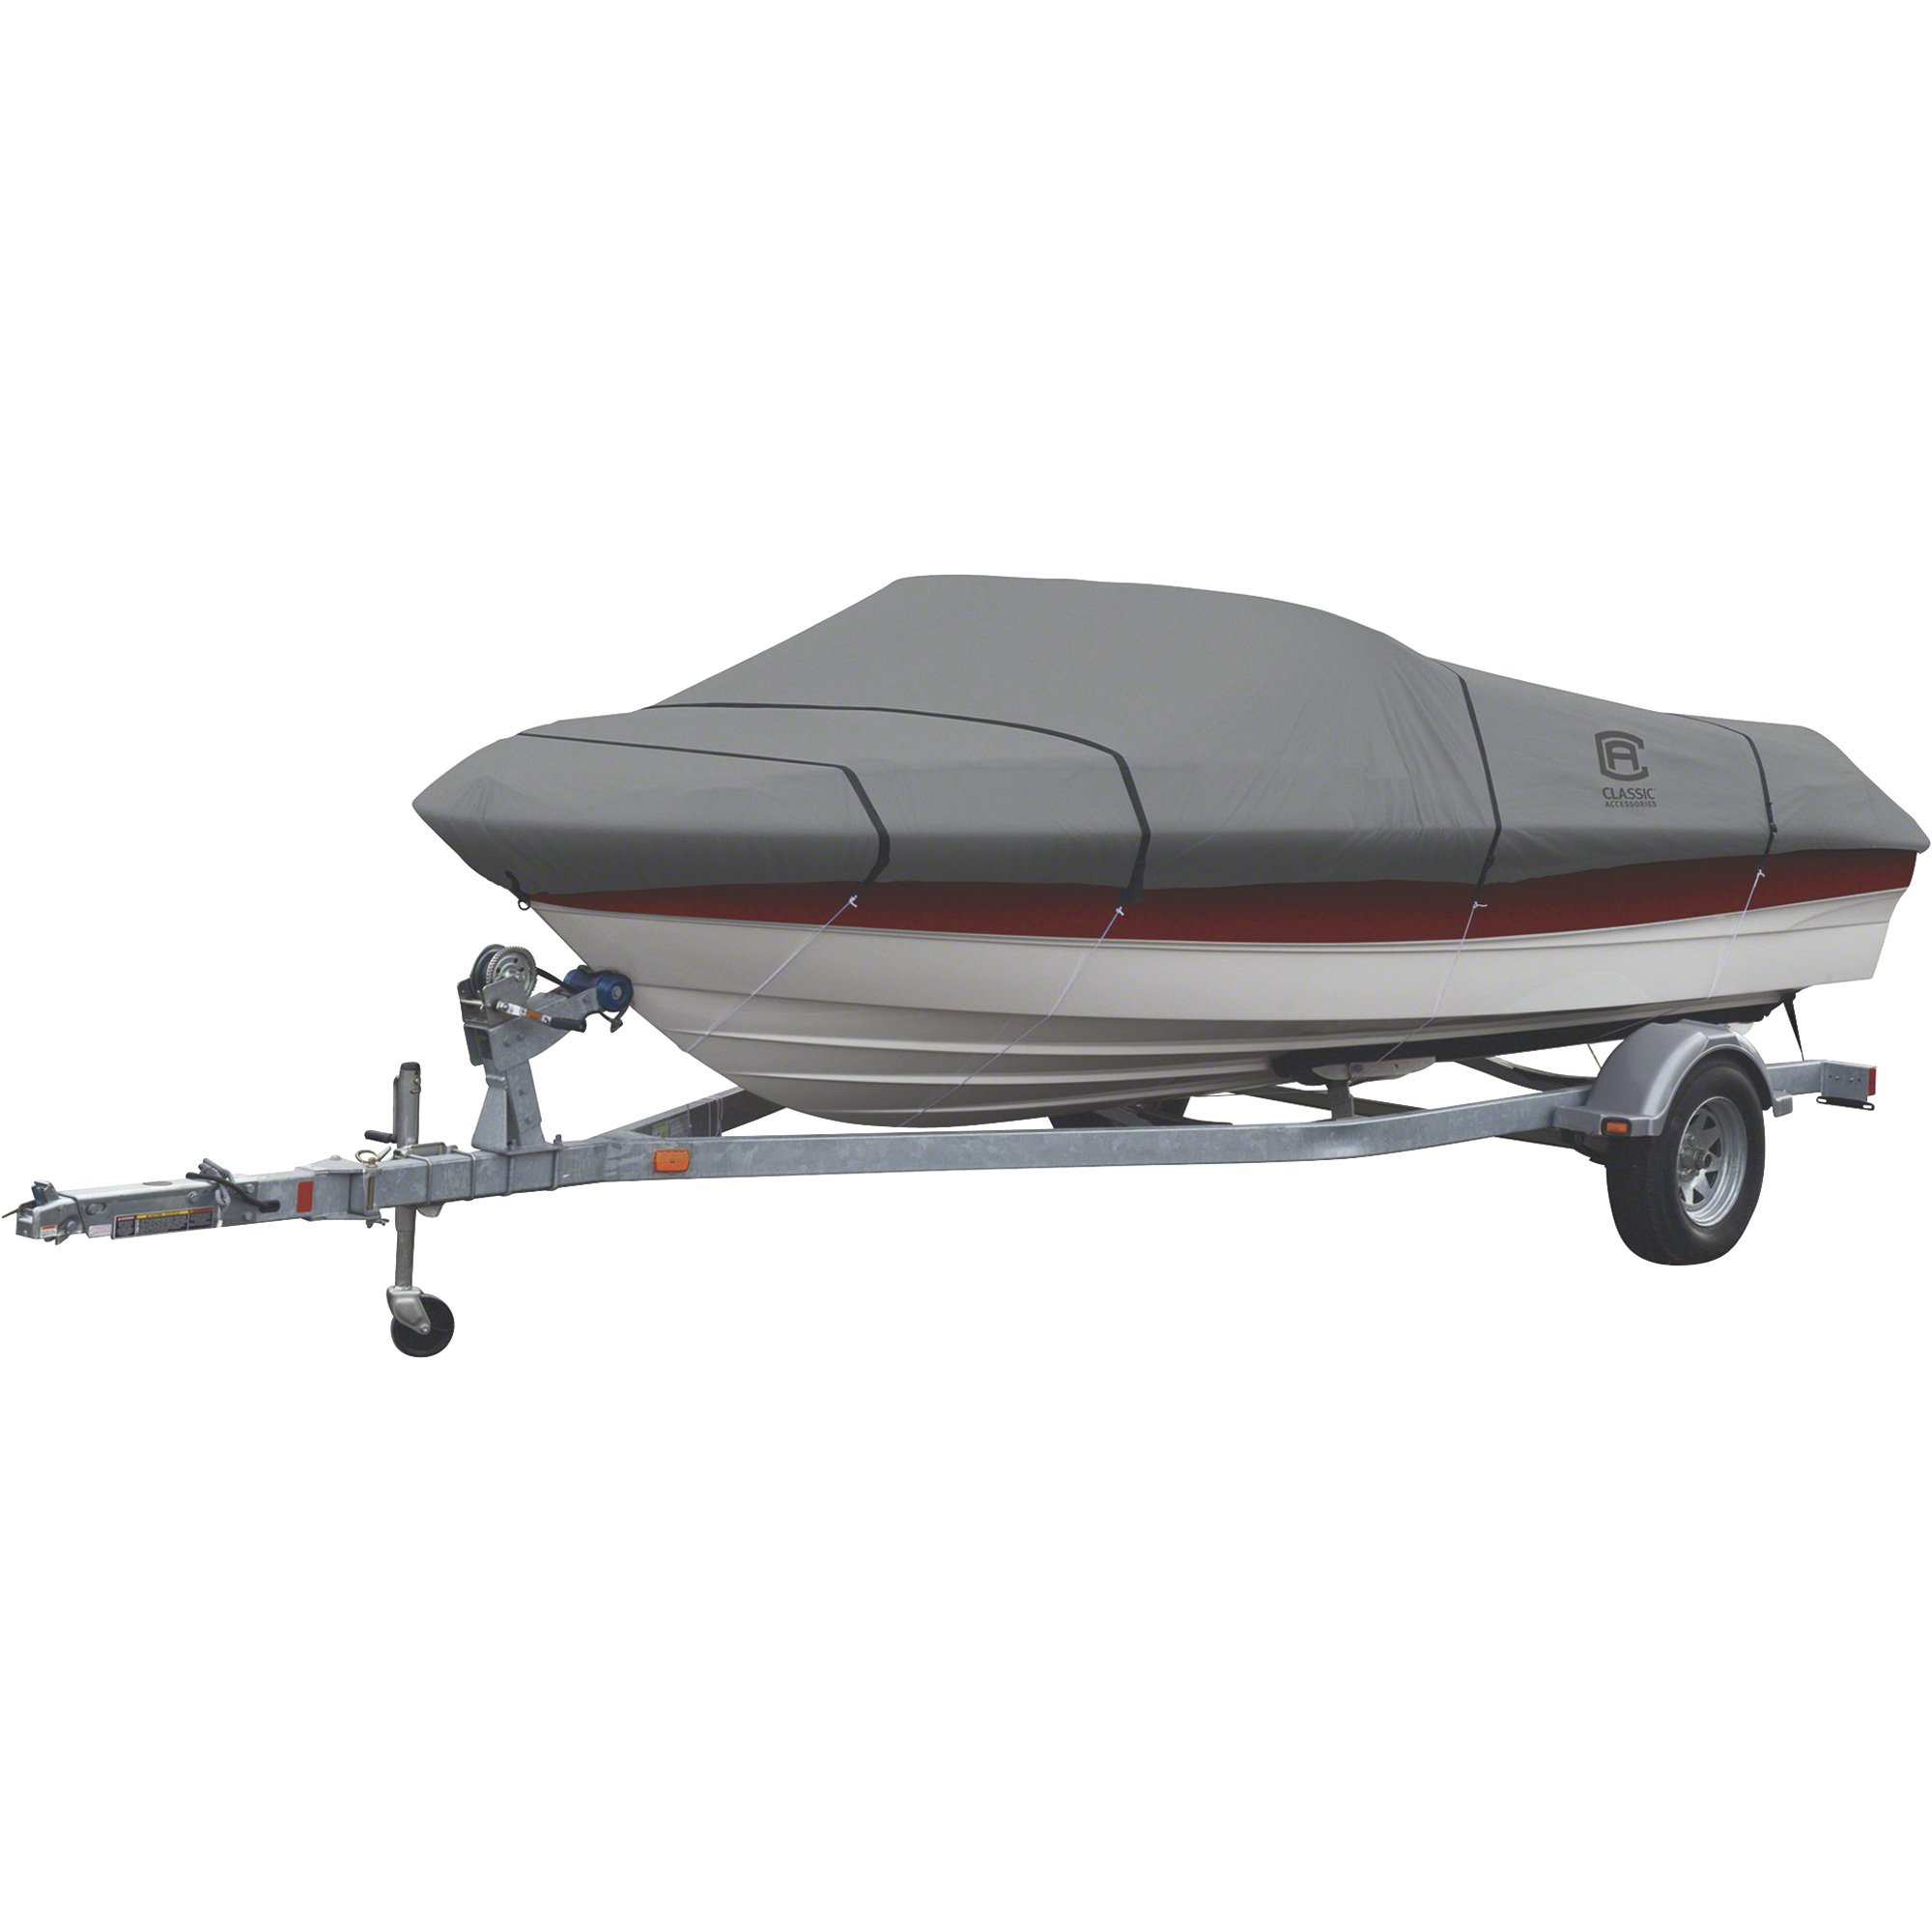 Classic Accessories Lunex RS-1 Trailerable Boat Cover, Fits 14ft